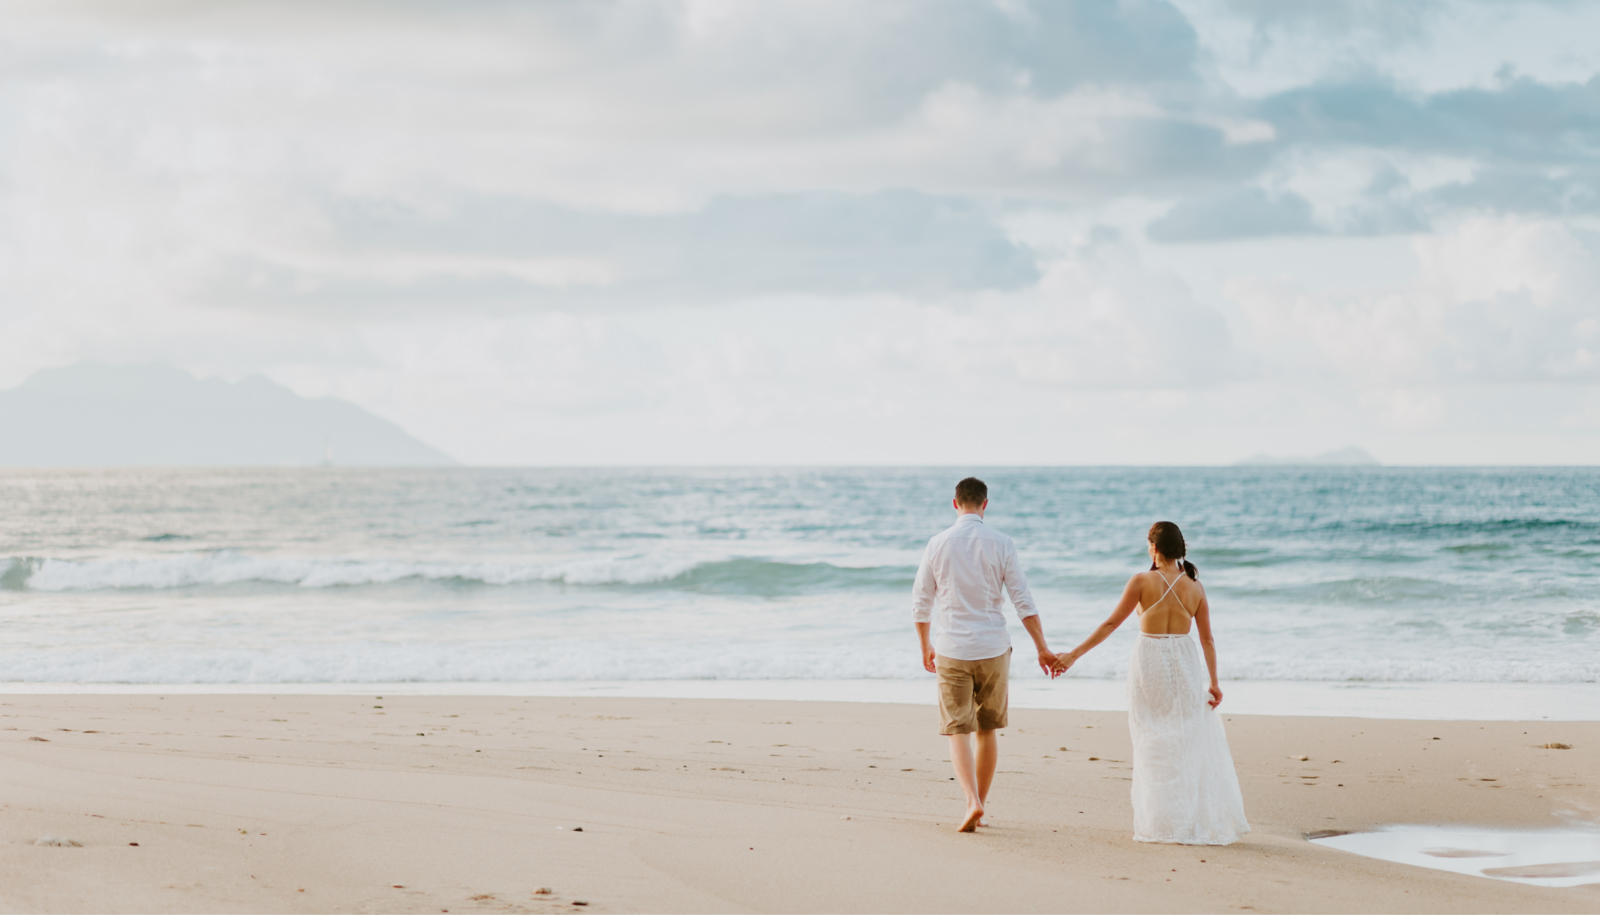 A Bride and Groom walking on the beach holding hands.